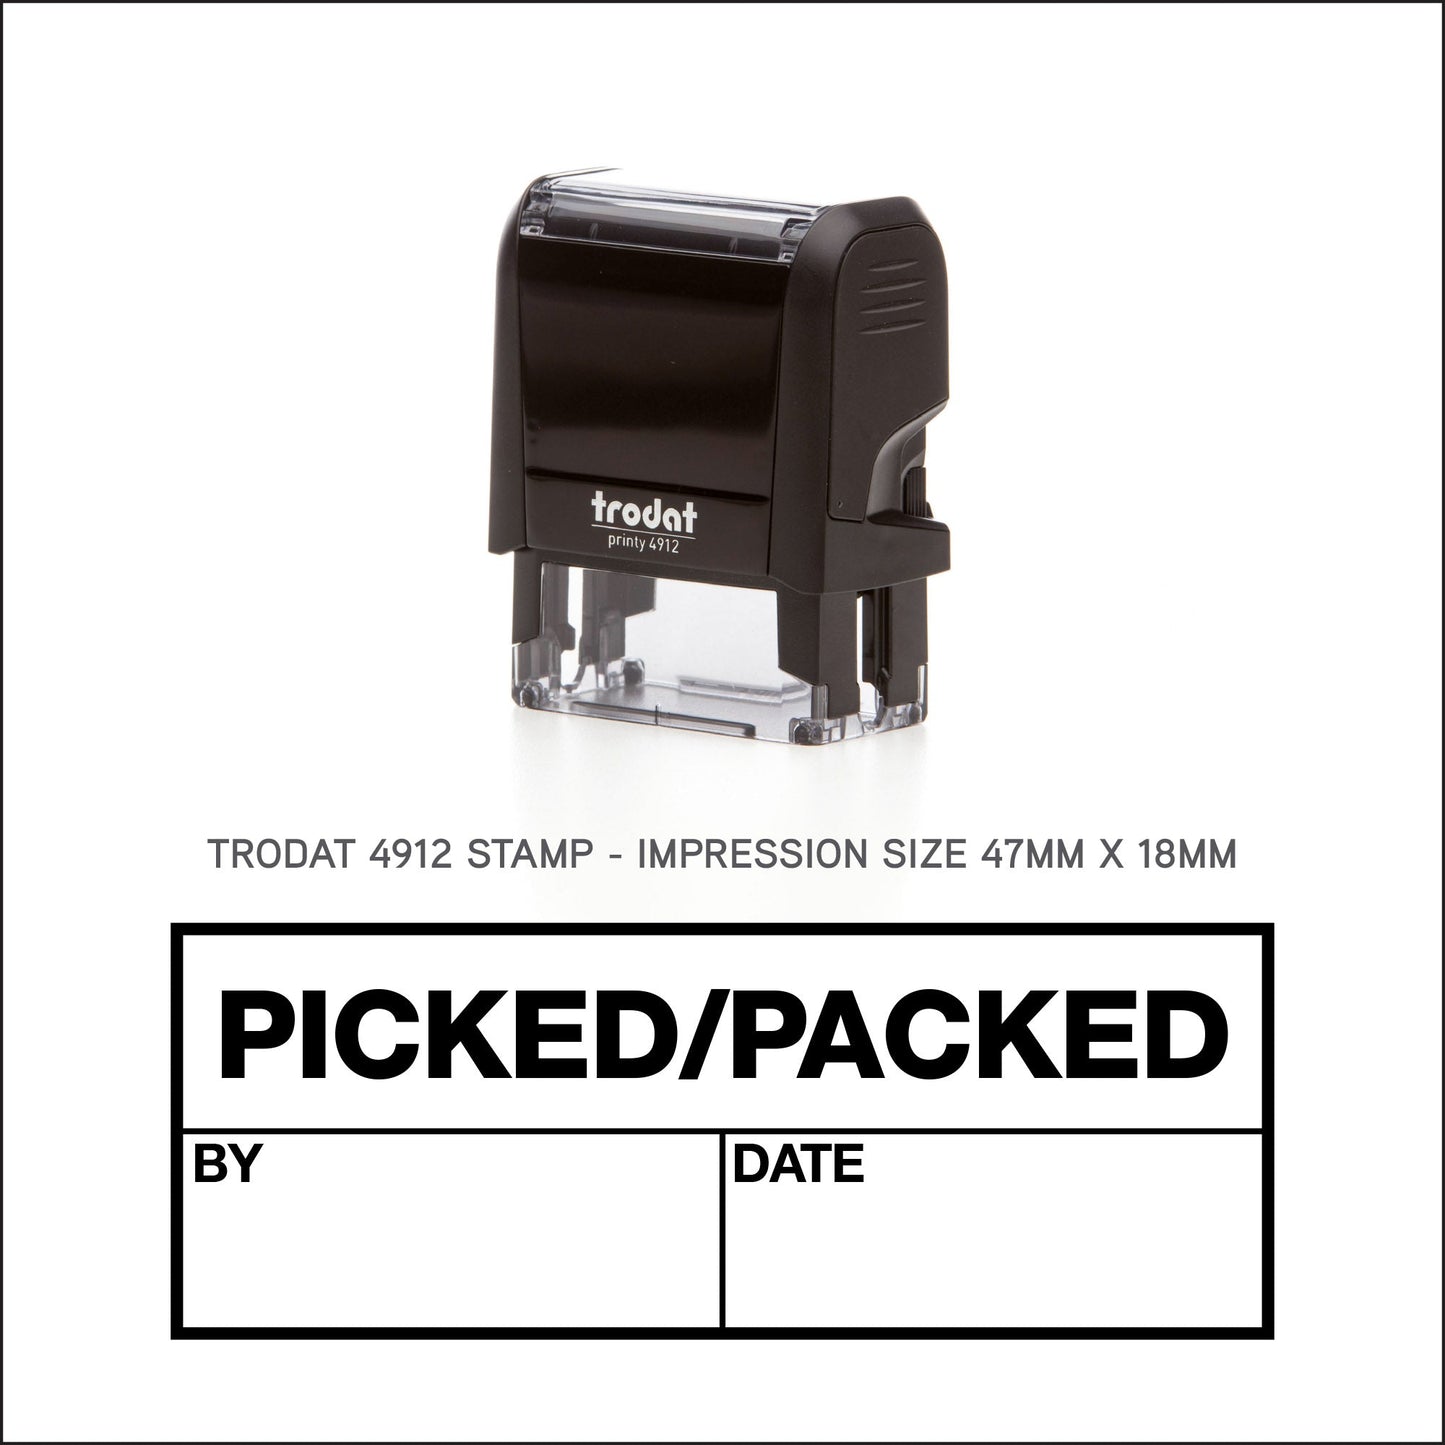 Picked - Packed - By - Date - Rubber Stamp - Trodat 4912 - 47mm x 18mm Impression